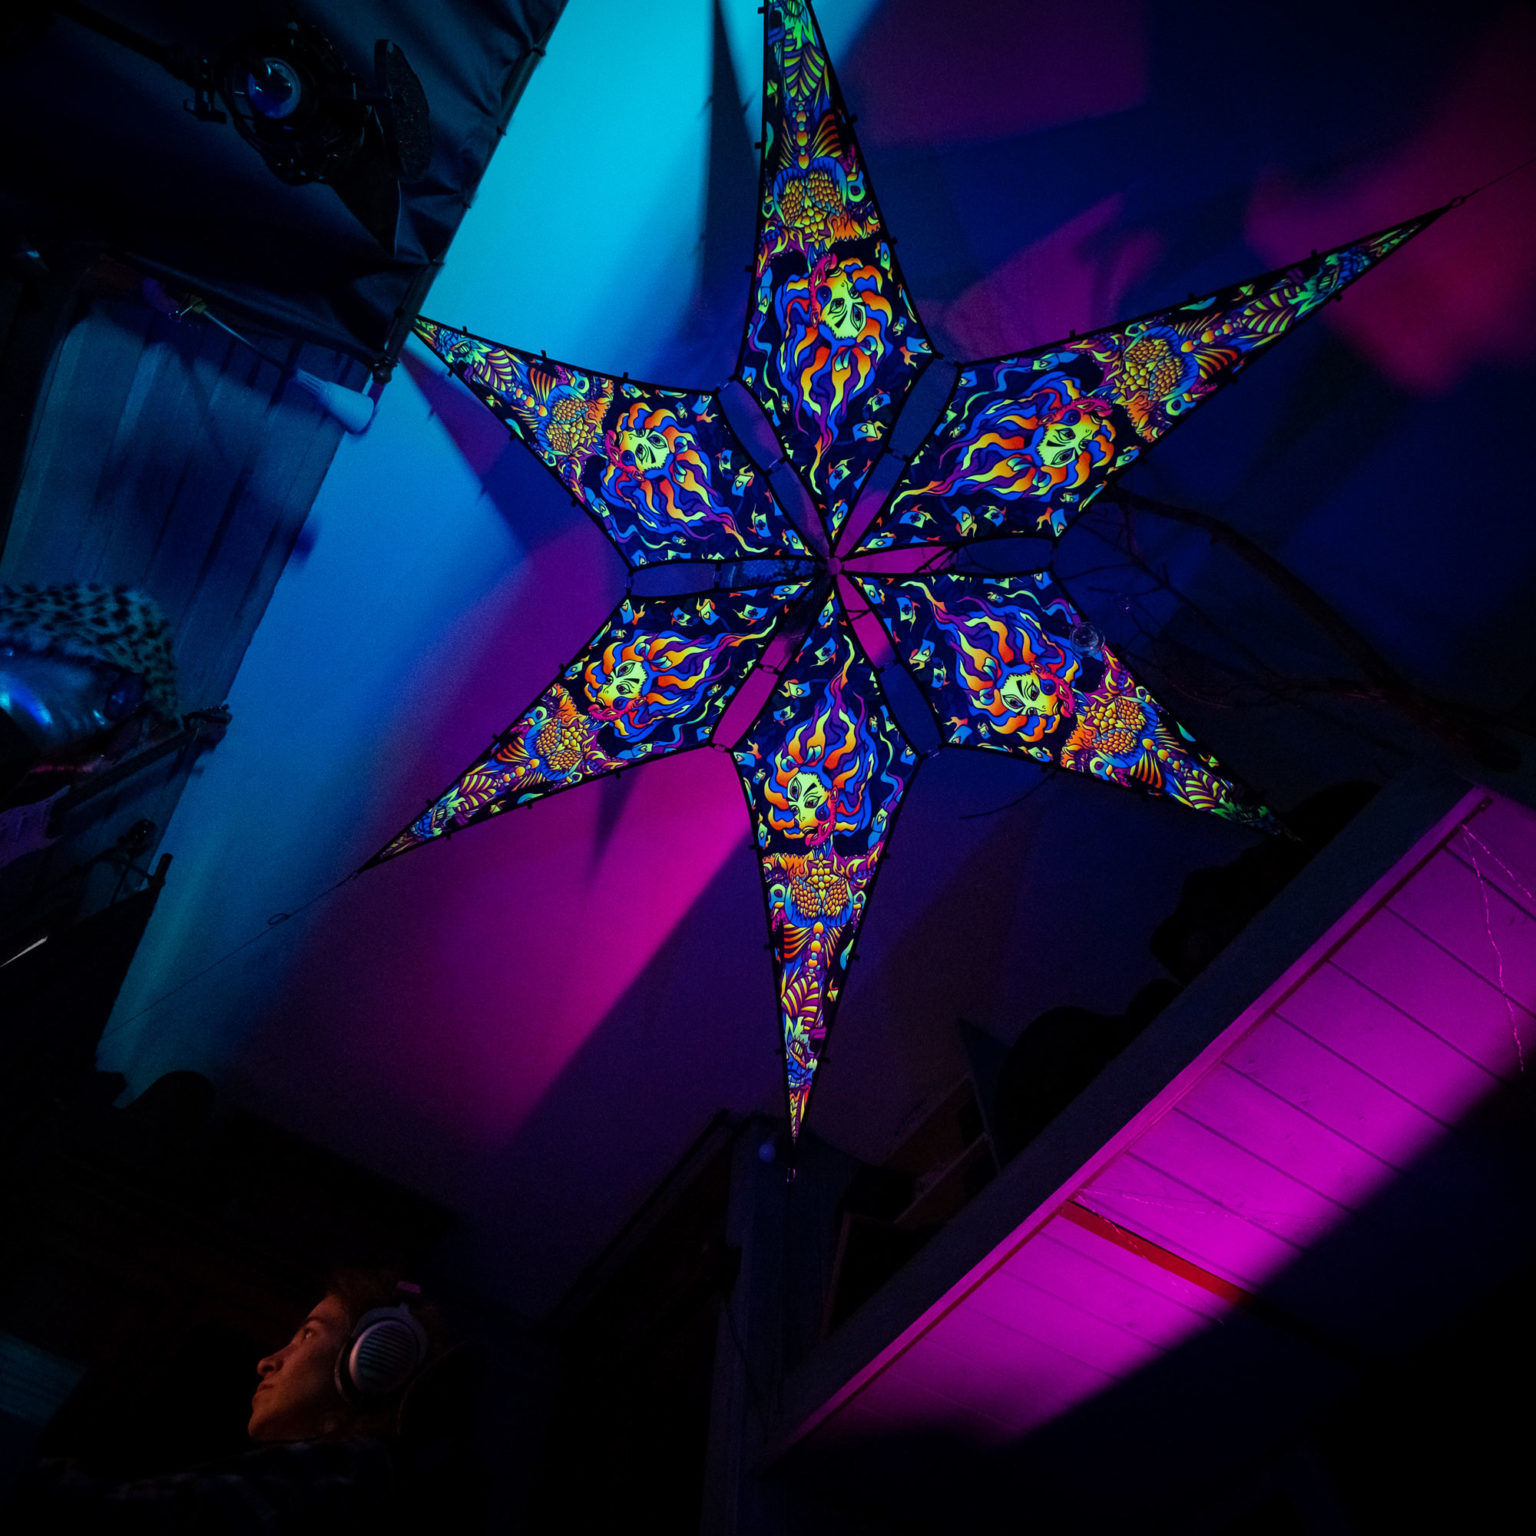 Acid Mother - Psychedelic UV-Reactive Ceiling Decoration Canopy 6 Petals